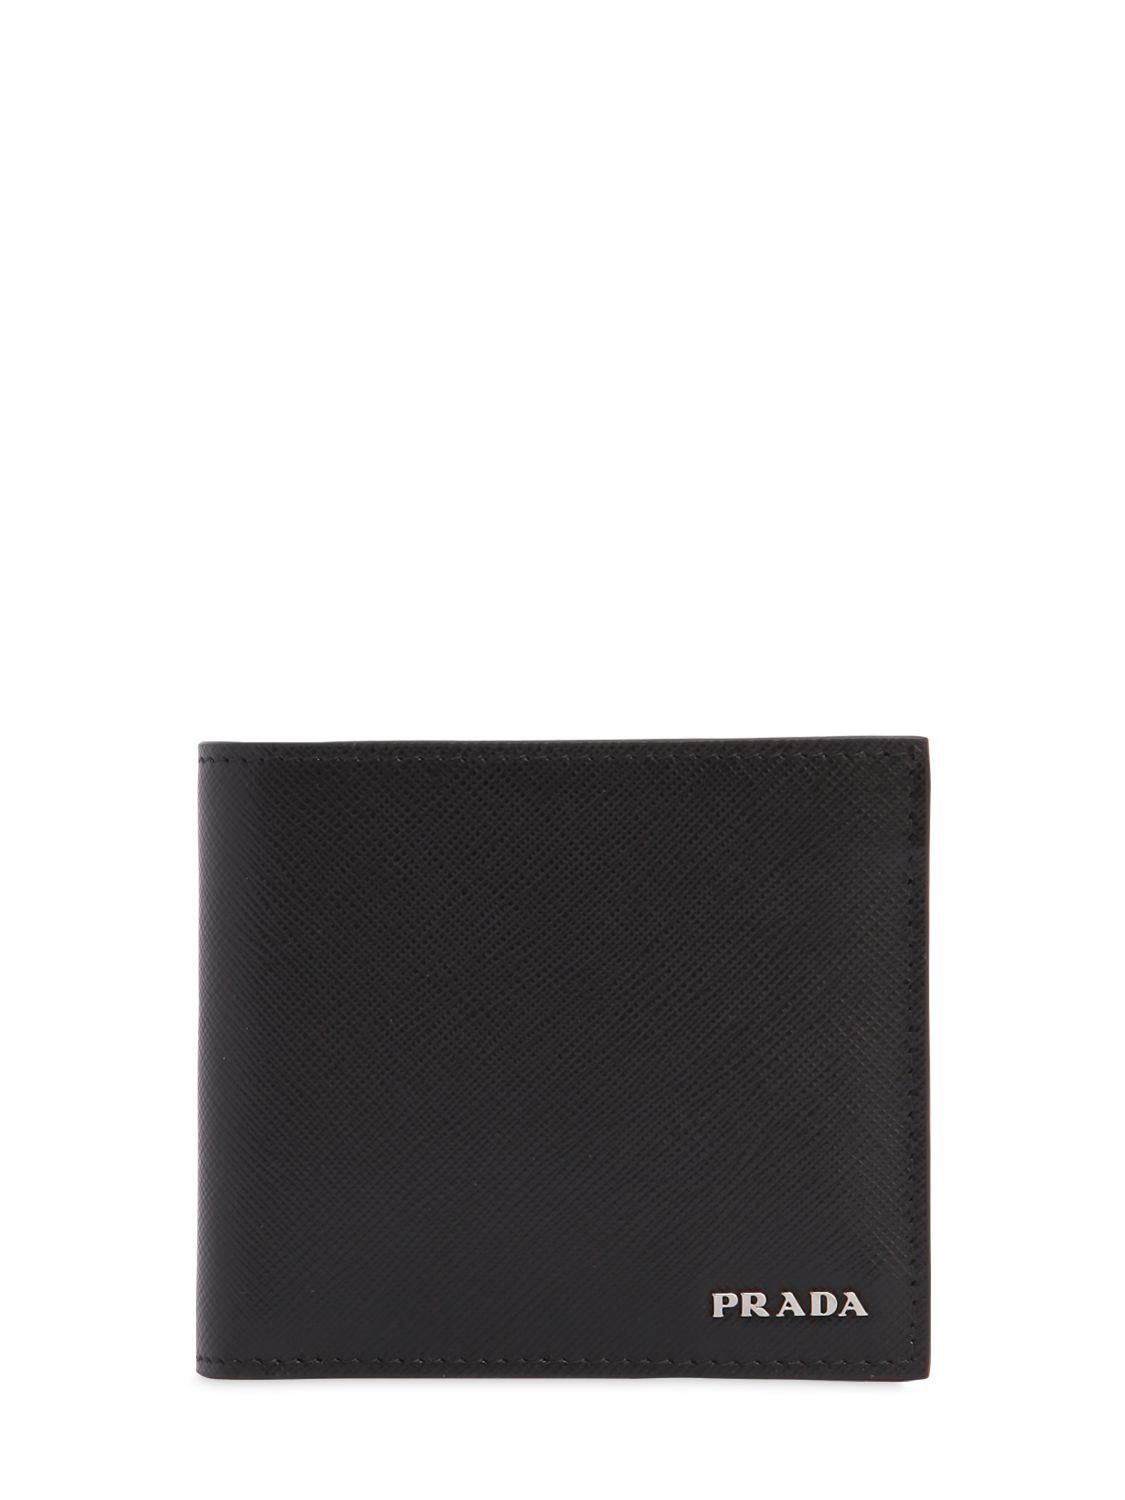 Prada Two Tone Saffiano Leather Classic Wallet in Black for Men | Lyst